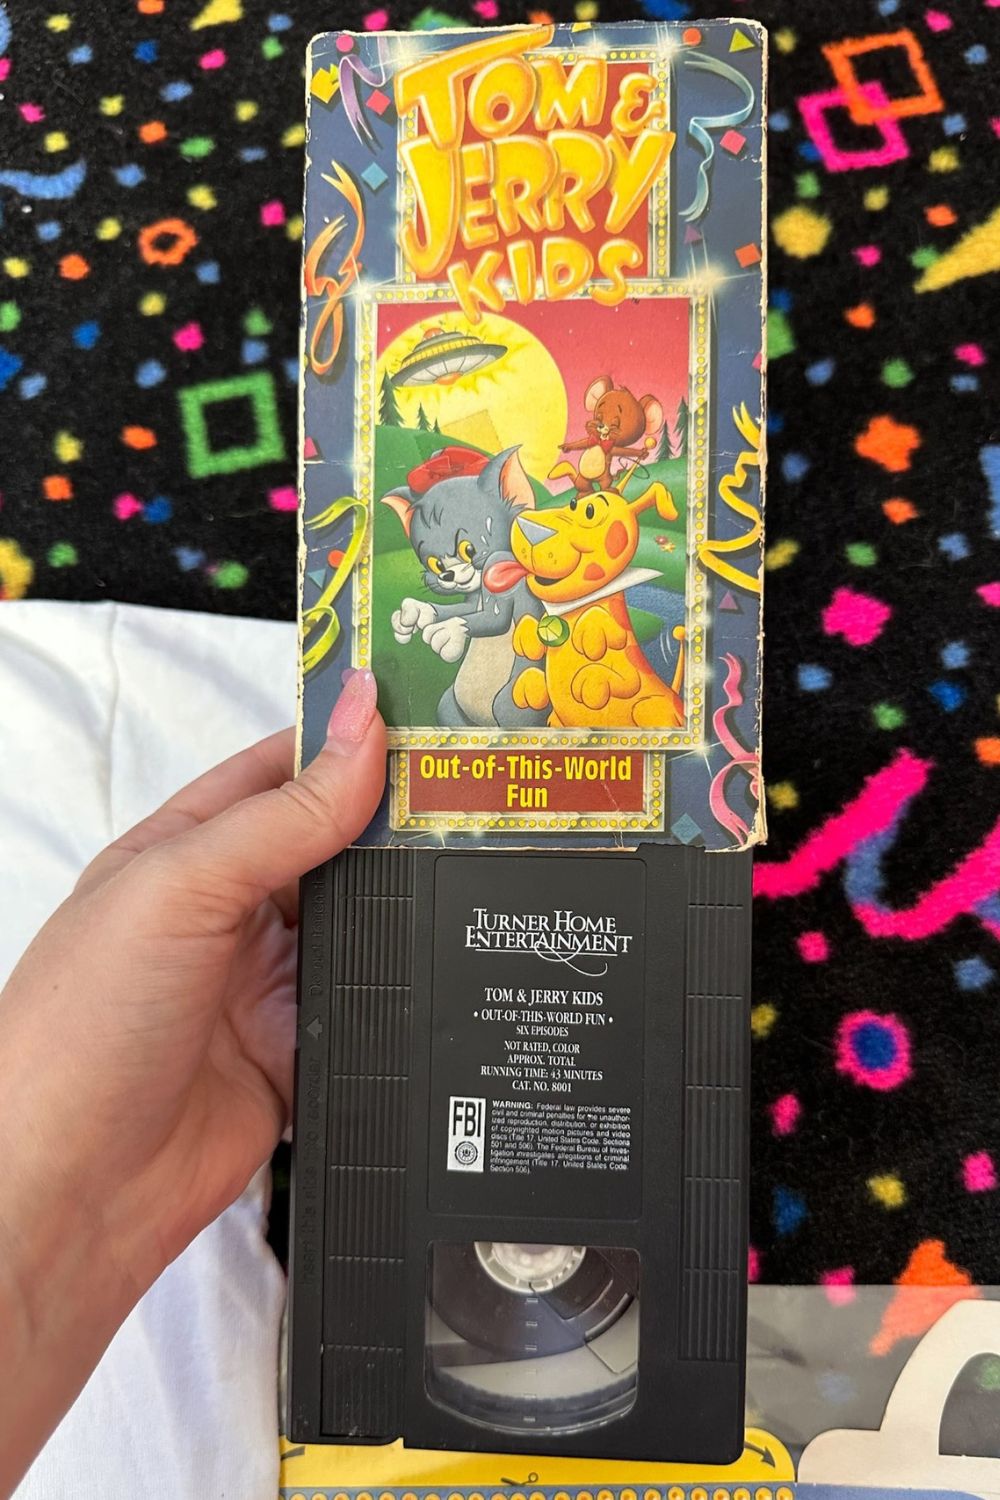 RARE TOM & JERRY KIDS OUT OF THIS WORLD FUN VHS*